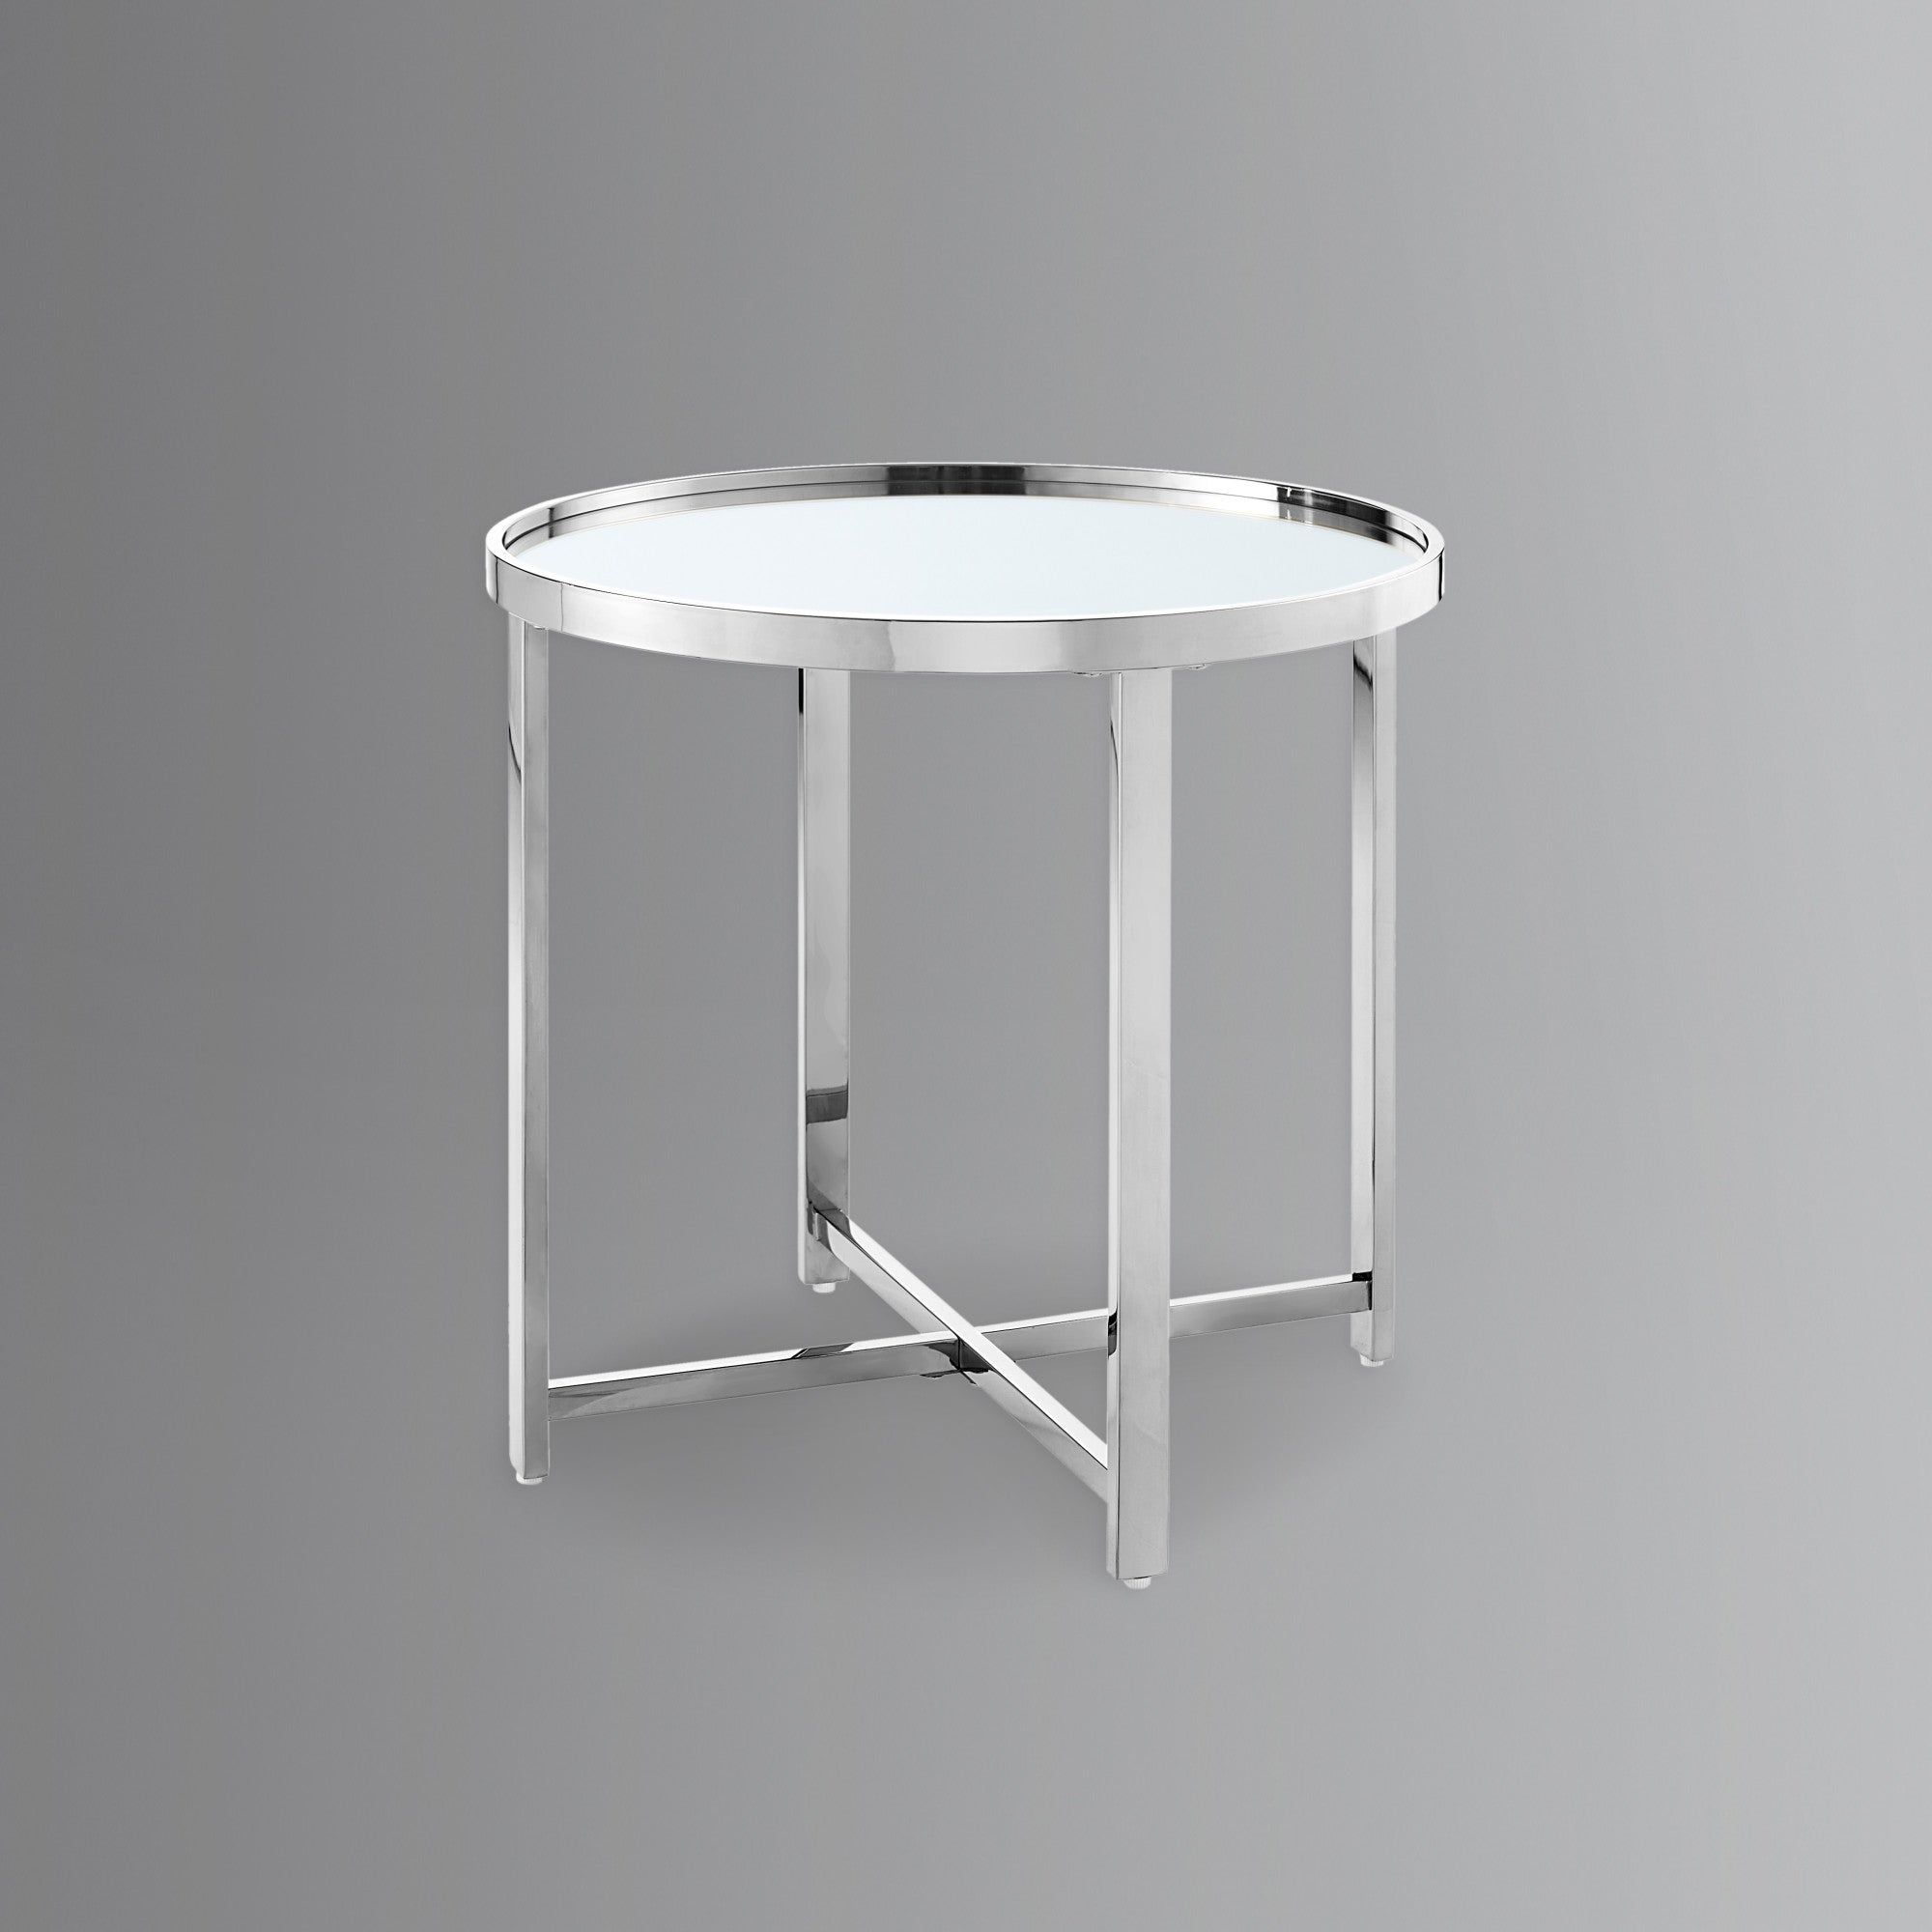 22" Silver Glass Round Mirrored End Table